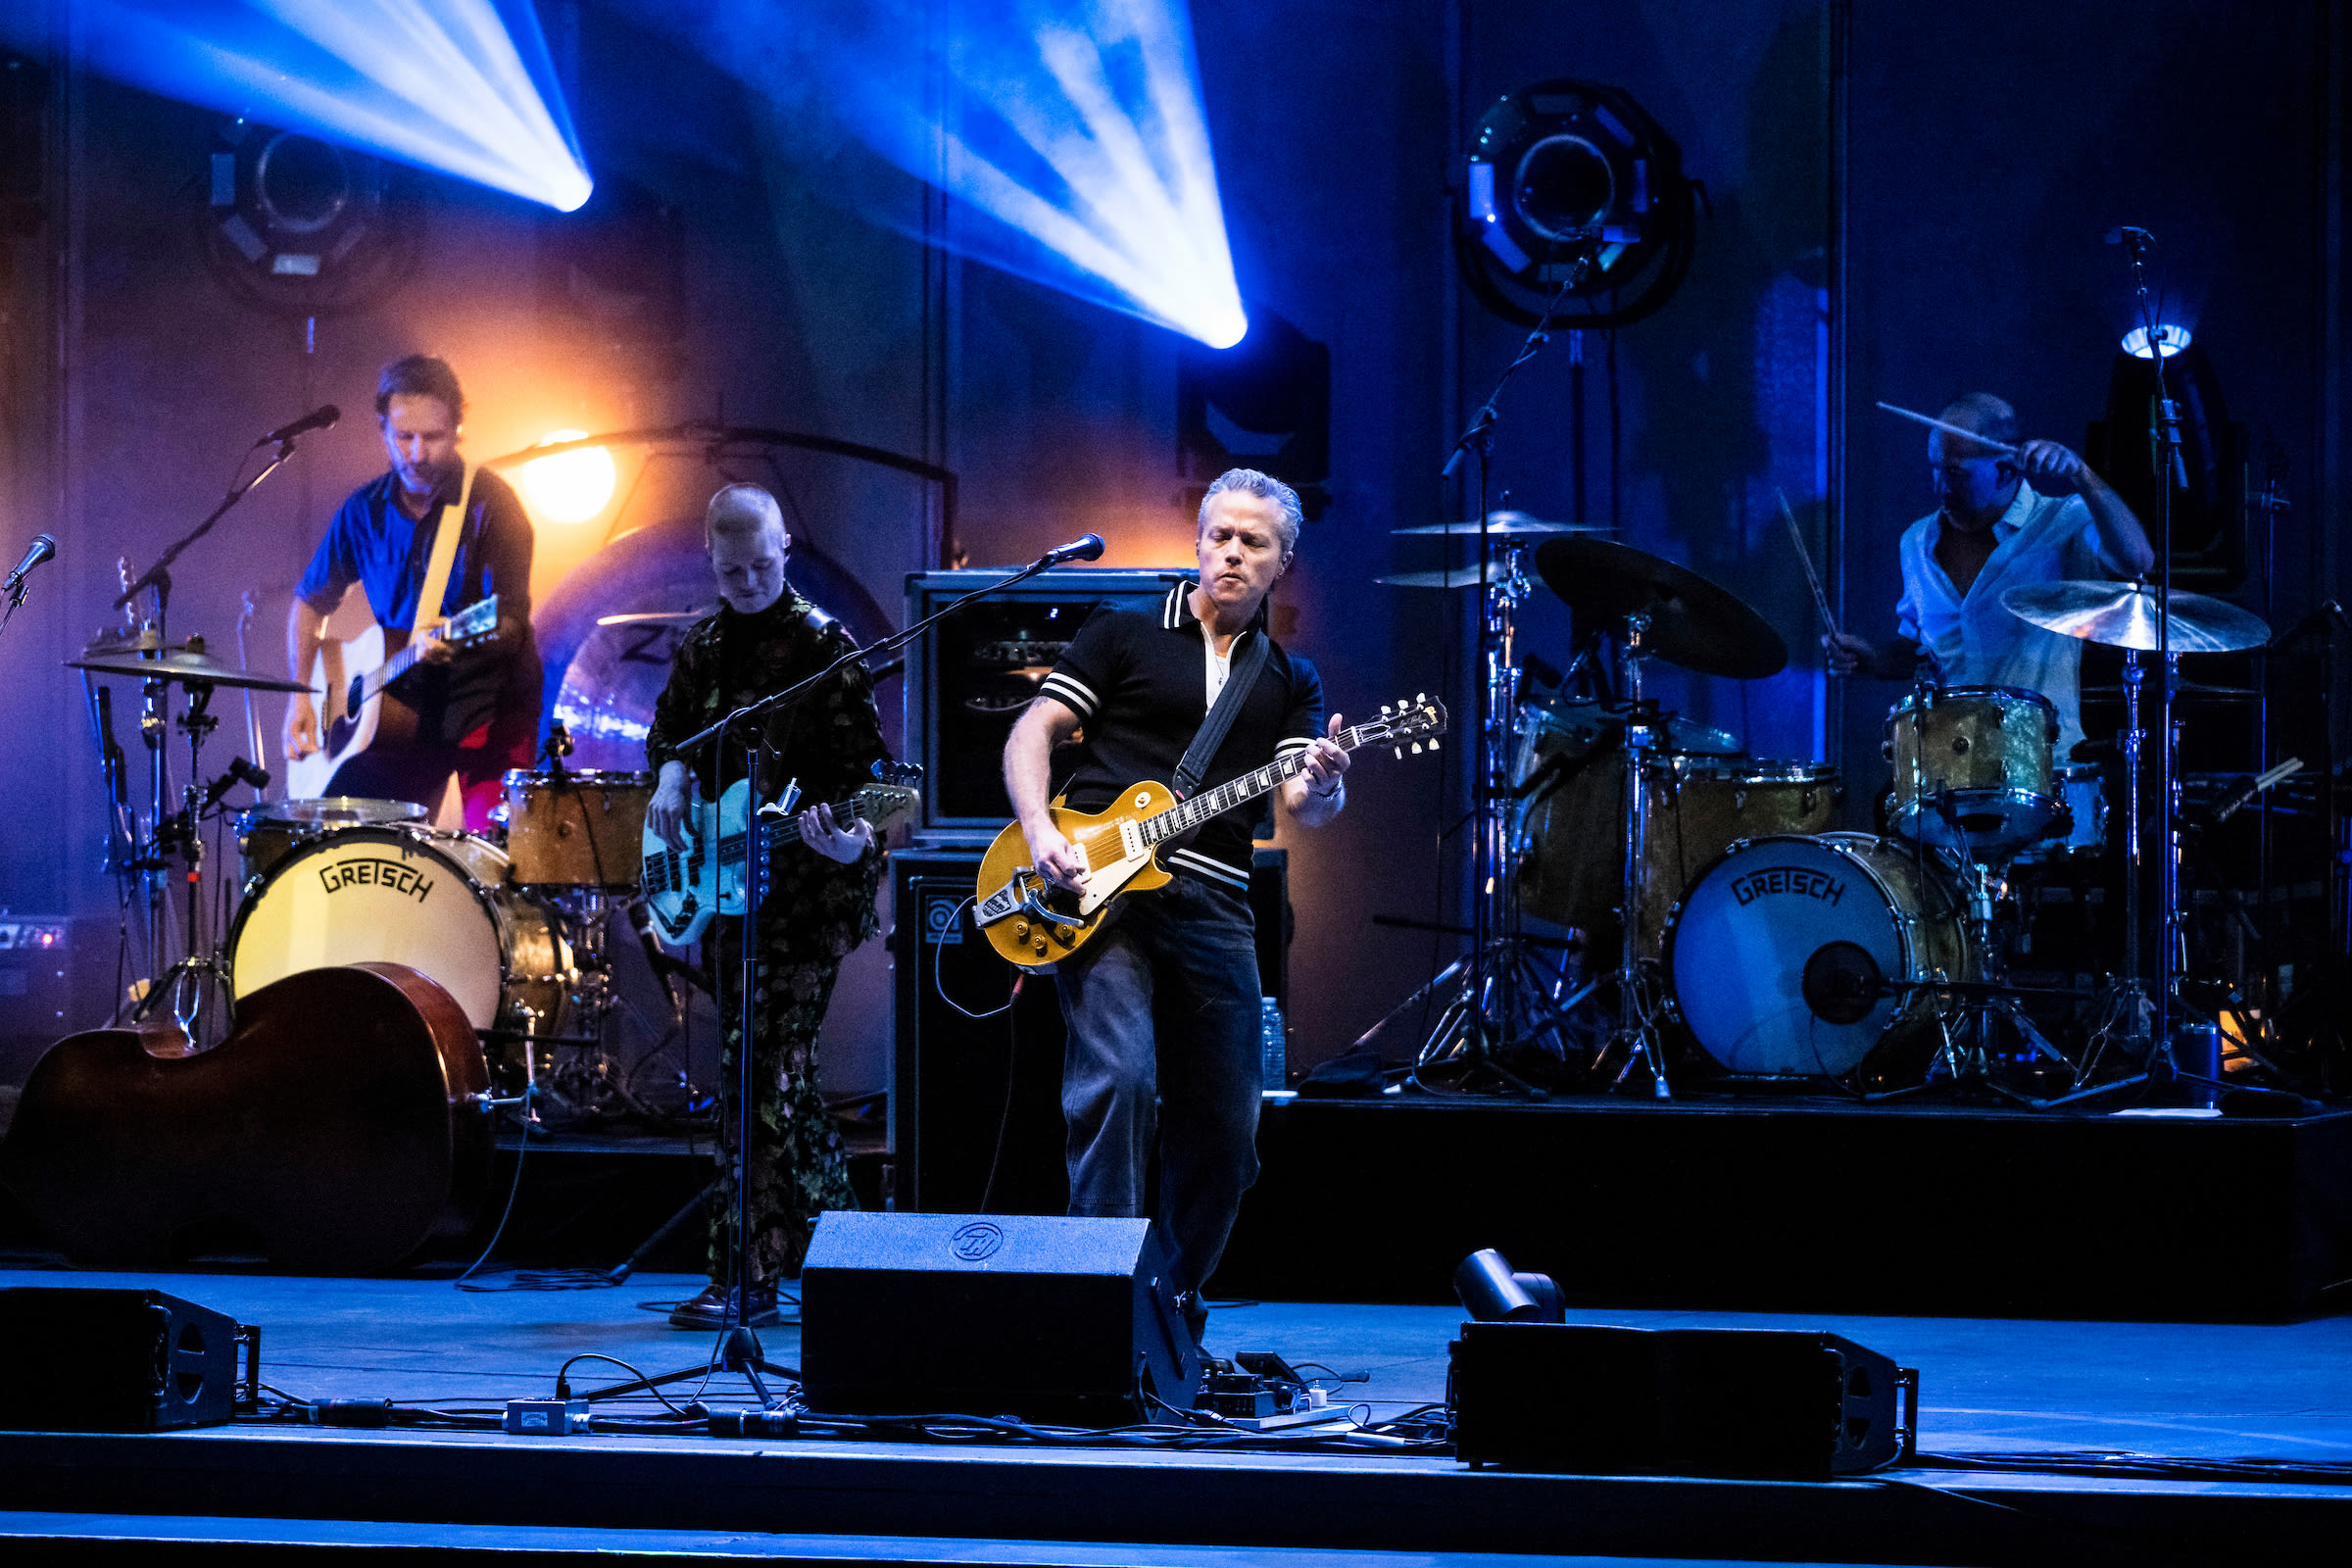 Jason Isbell and the 400 Unit Blow Into L.A. With Powerful ‘Weathervanes’ Songs at the Hollywood Bowl: Concert Review